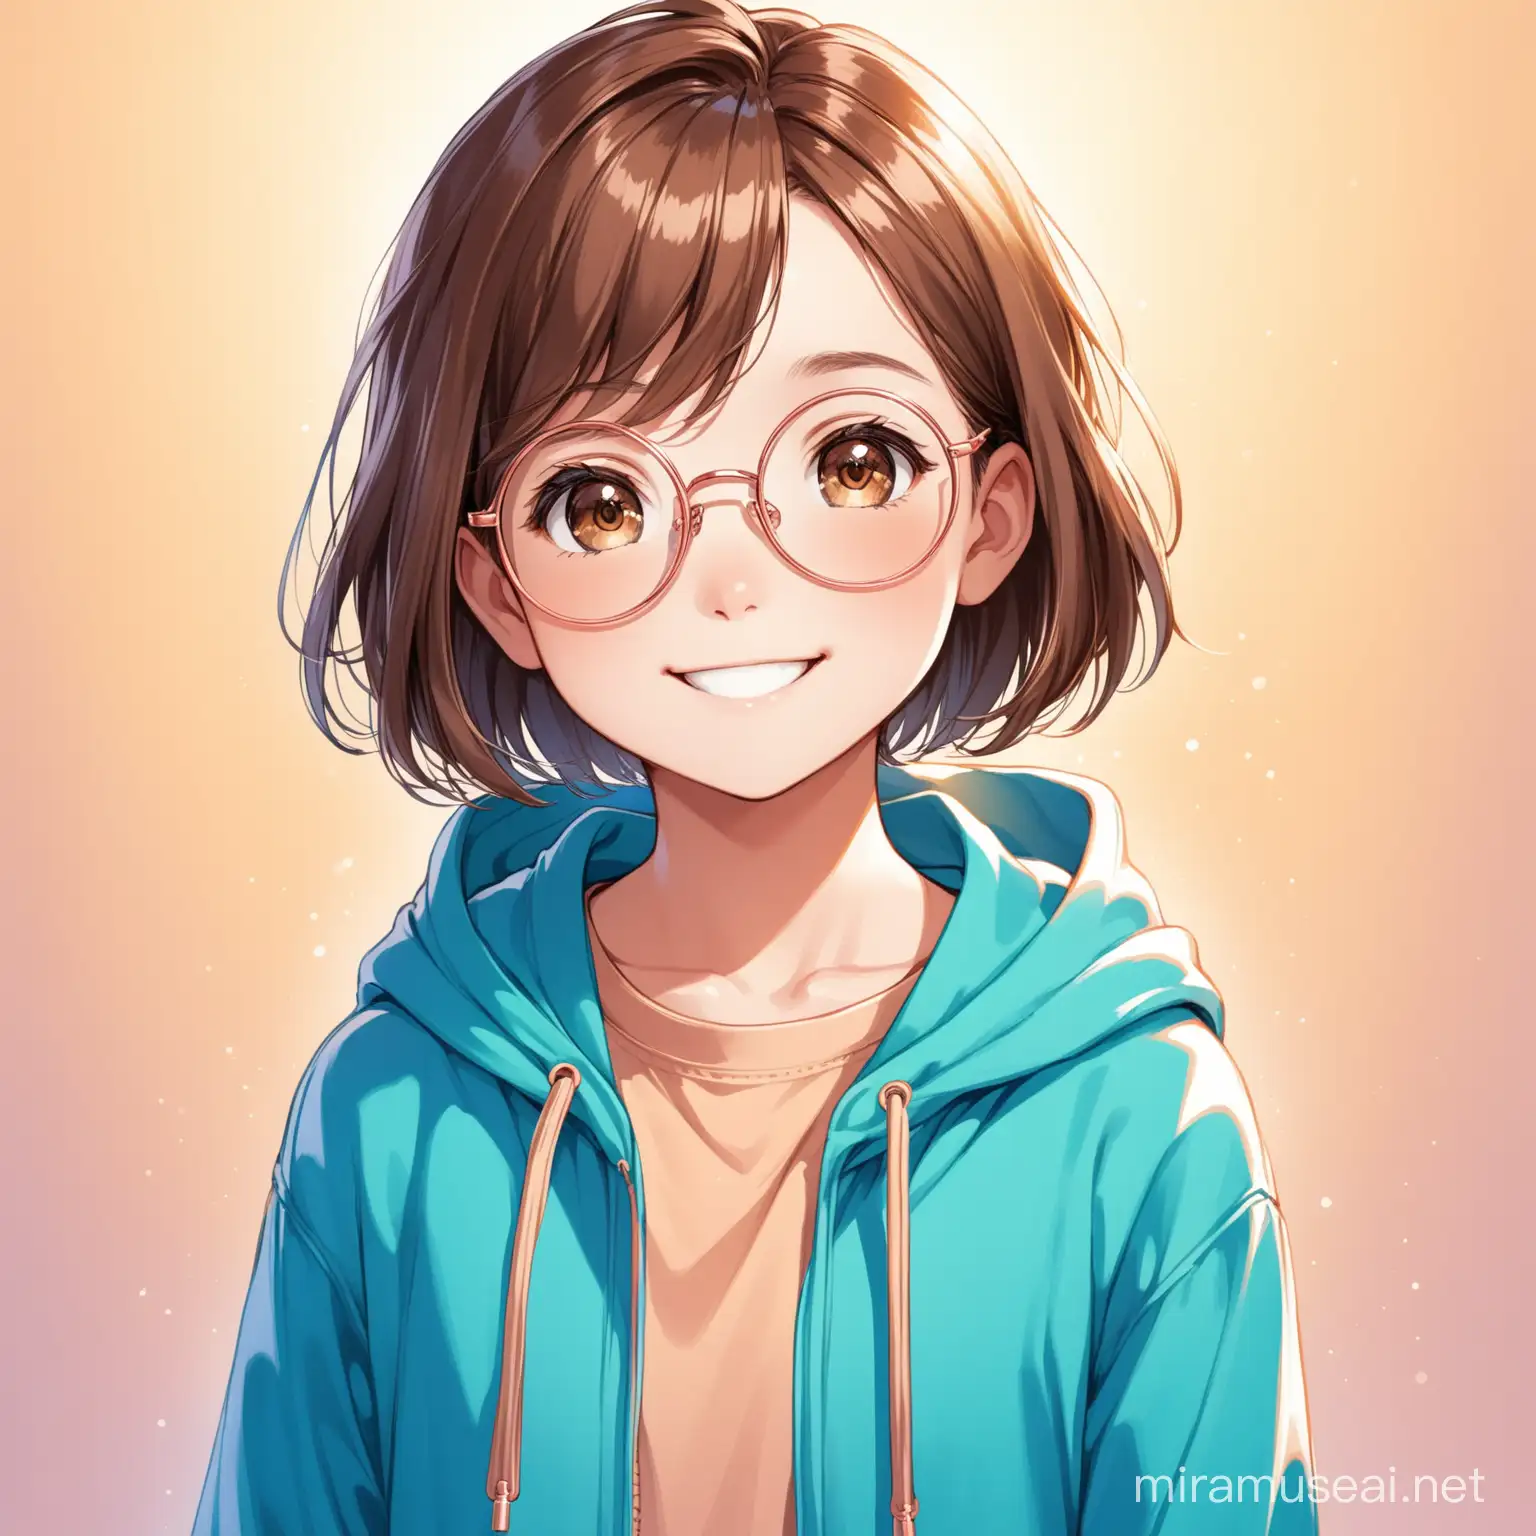 Smiling 12YearOld Girl with Rose Gold Glasses in Blue Hoodie